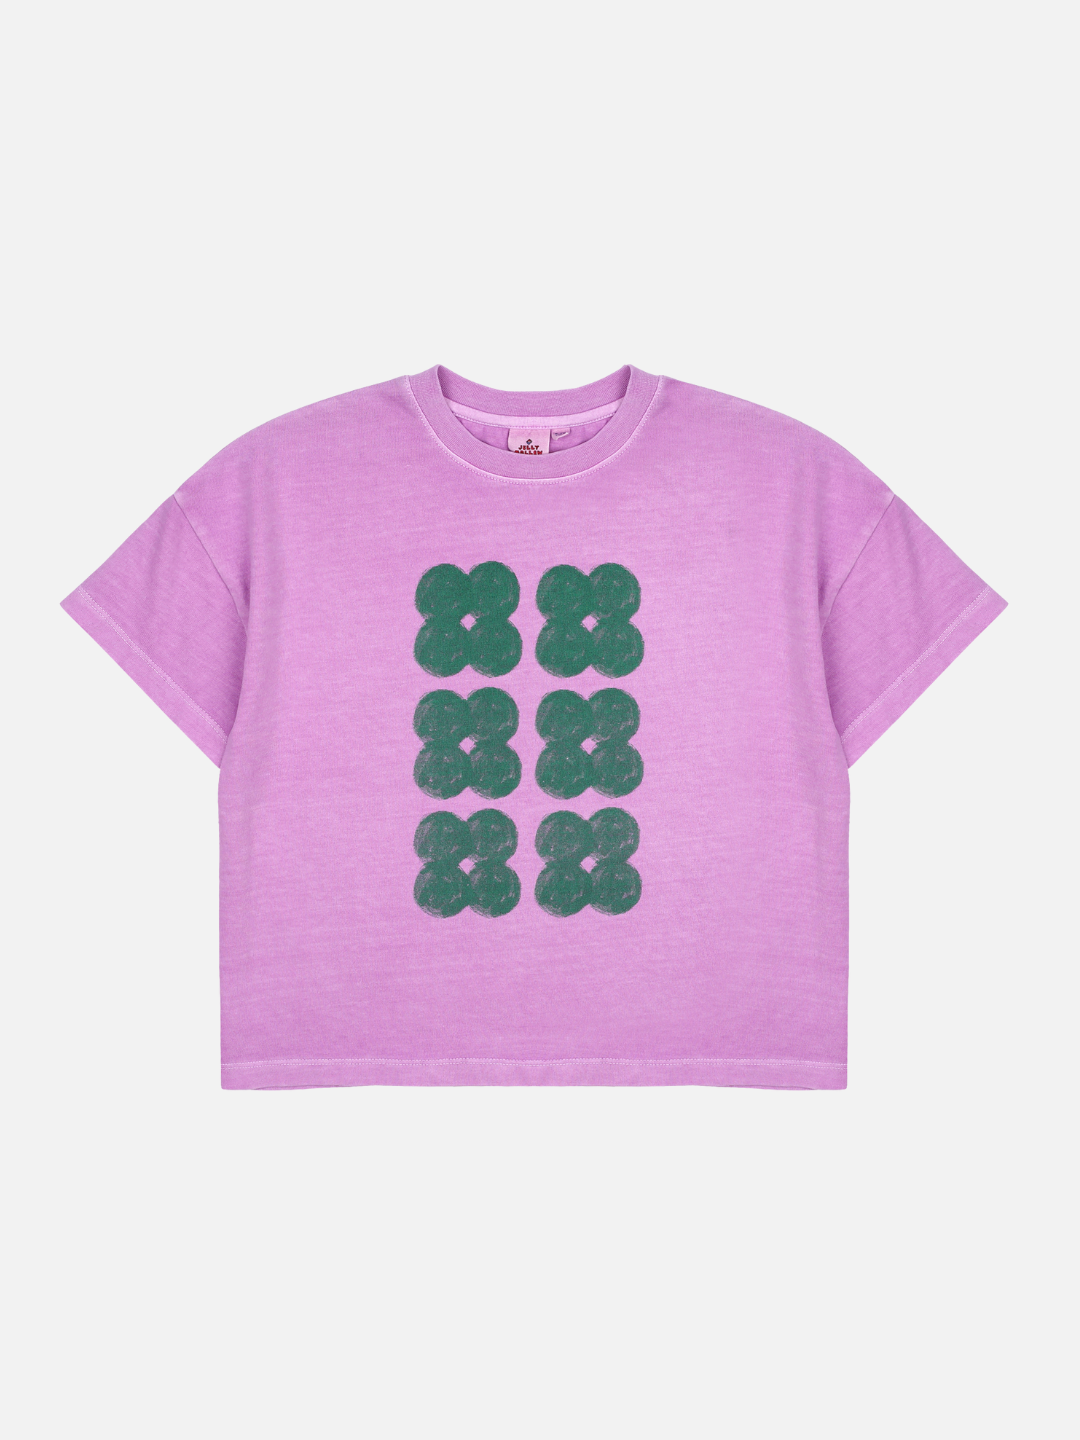 Purple | Front of T-shirt with six dark green clover shapes in two vertical rows on a light purple background.